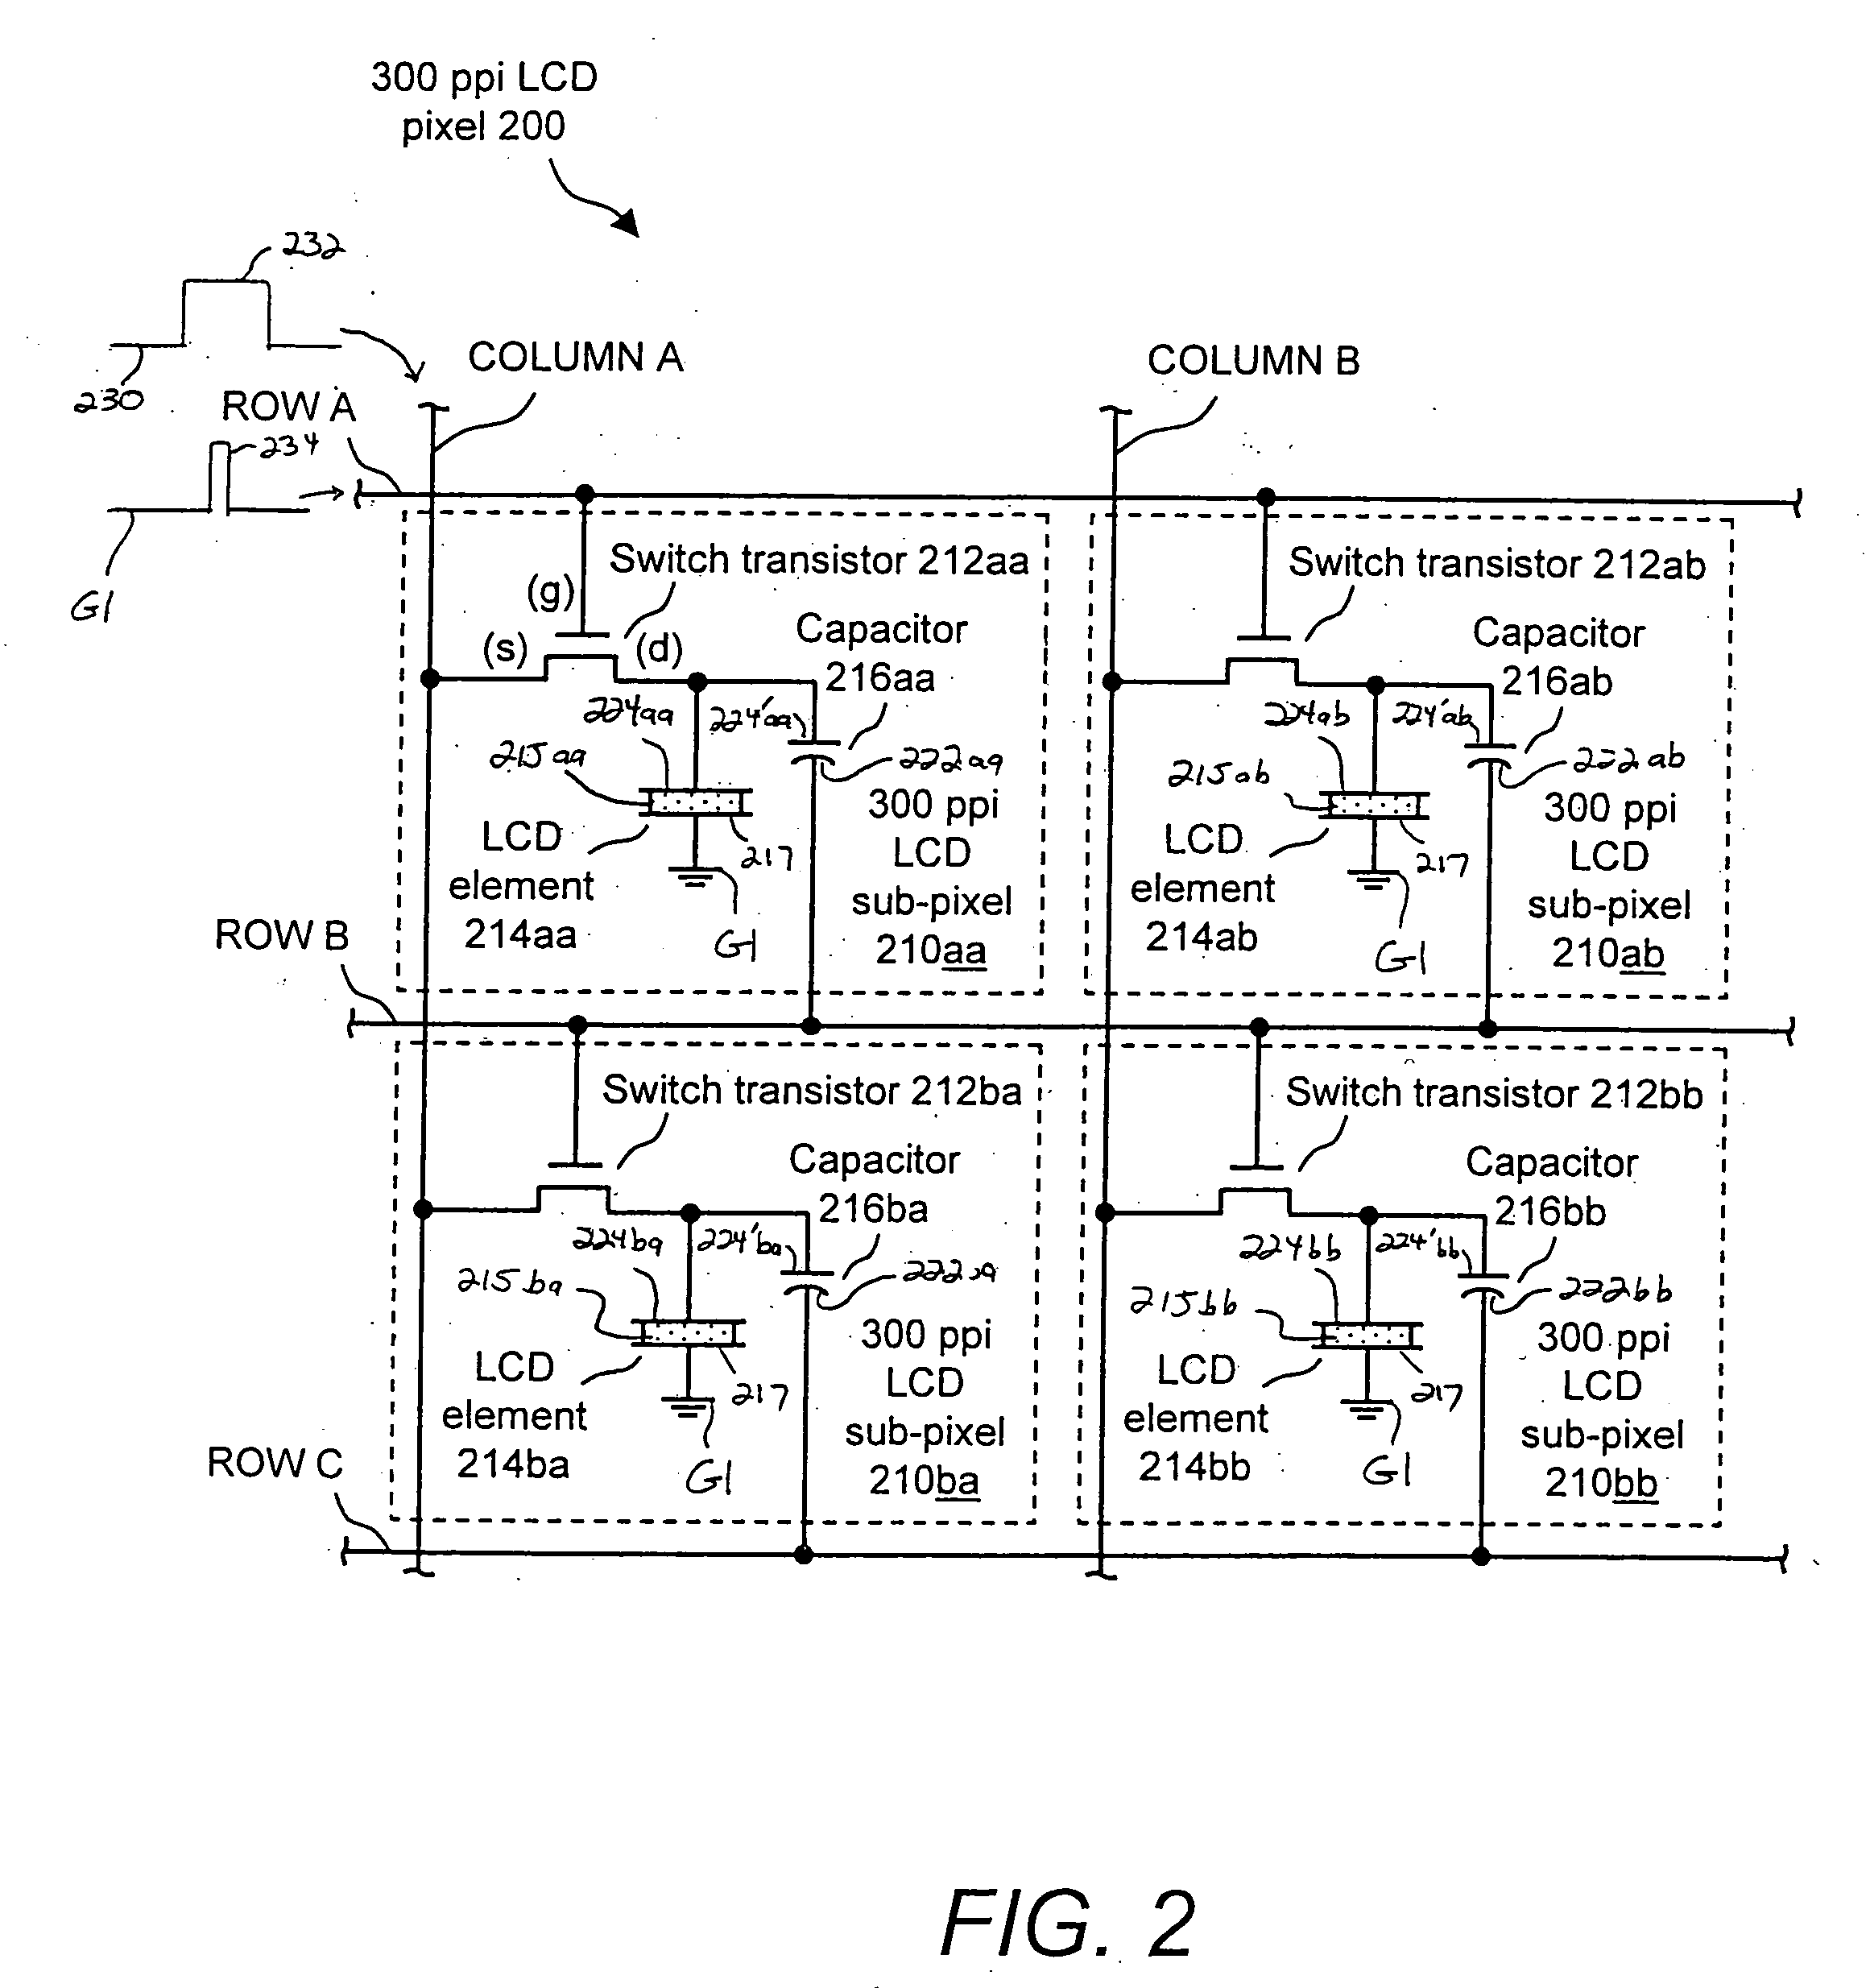 Shadow mask deposition system for and method of forming a high resolution active matrix liquid crystal display (LCD) and pixel structures formed therewith